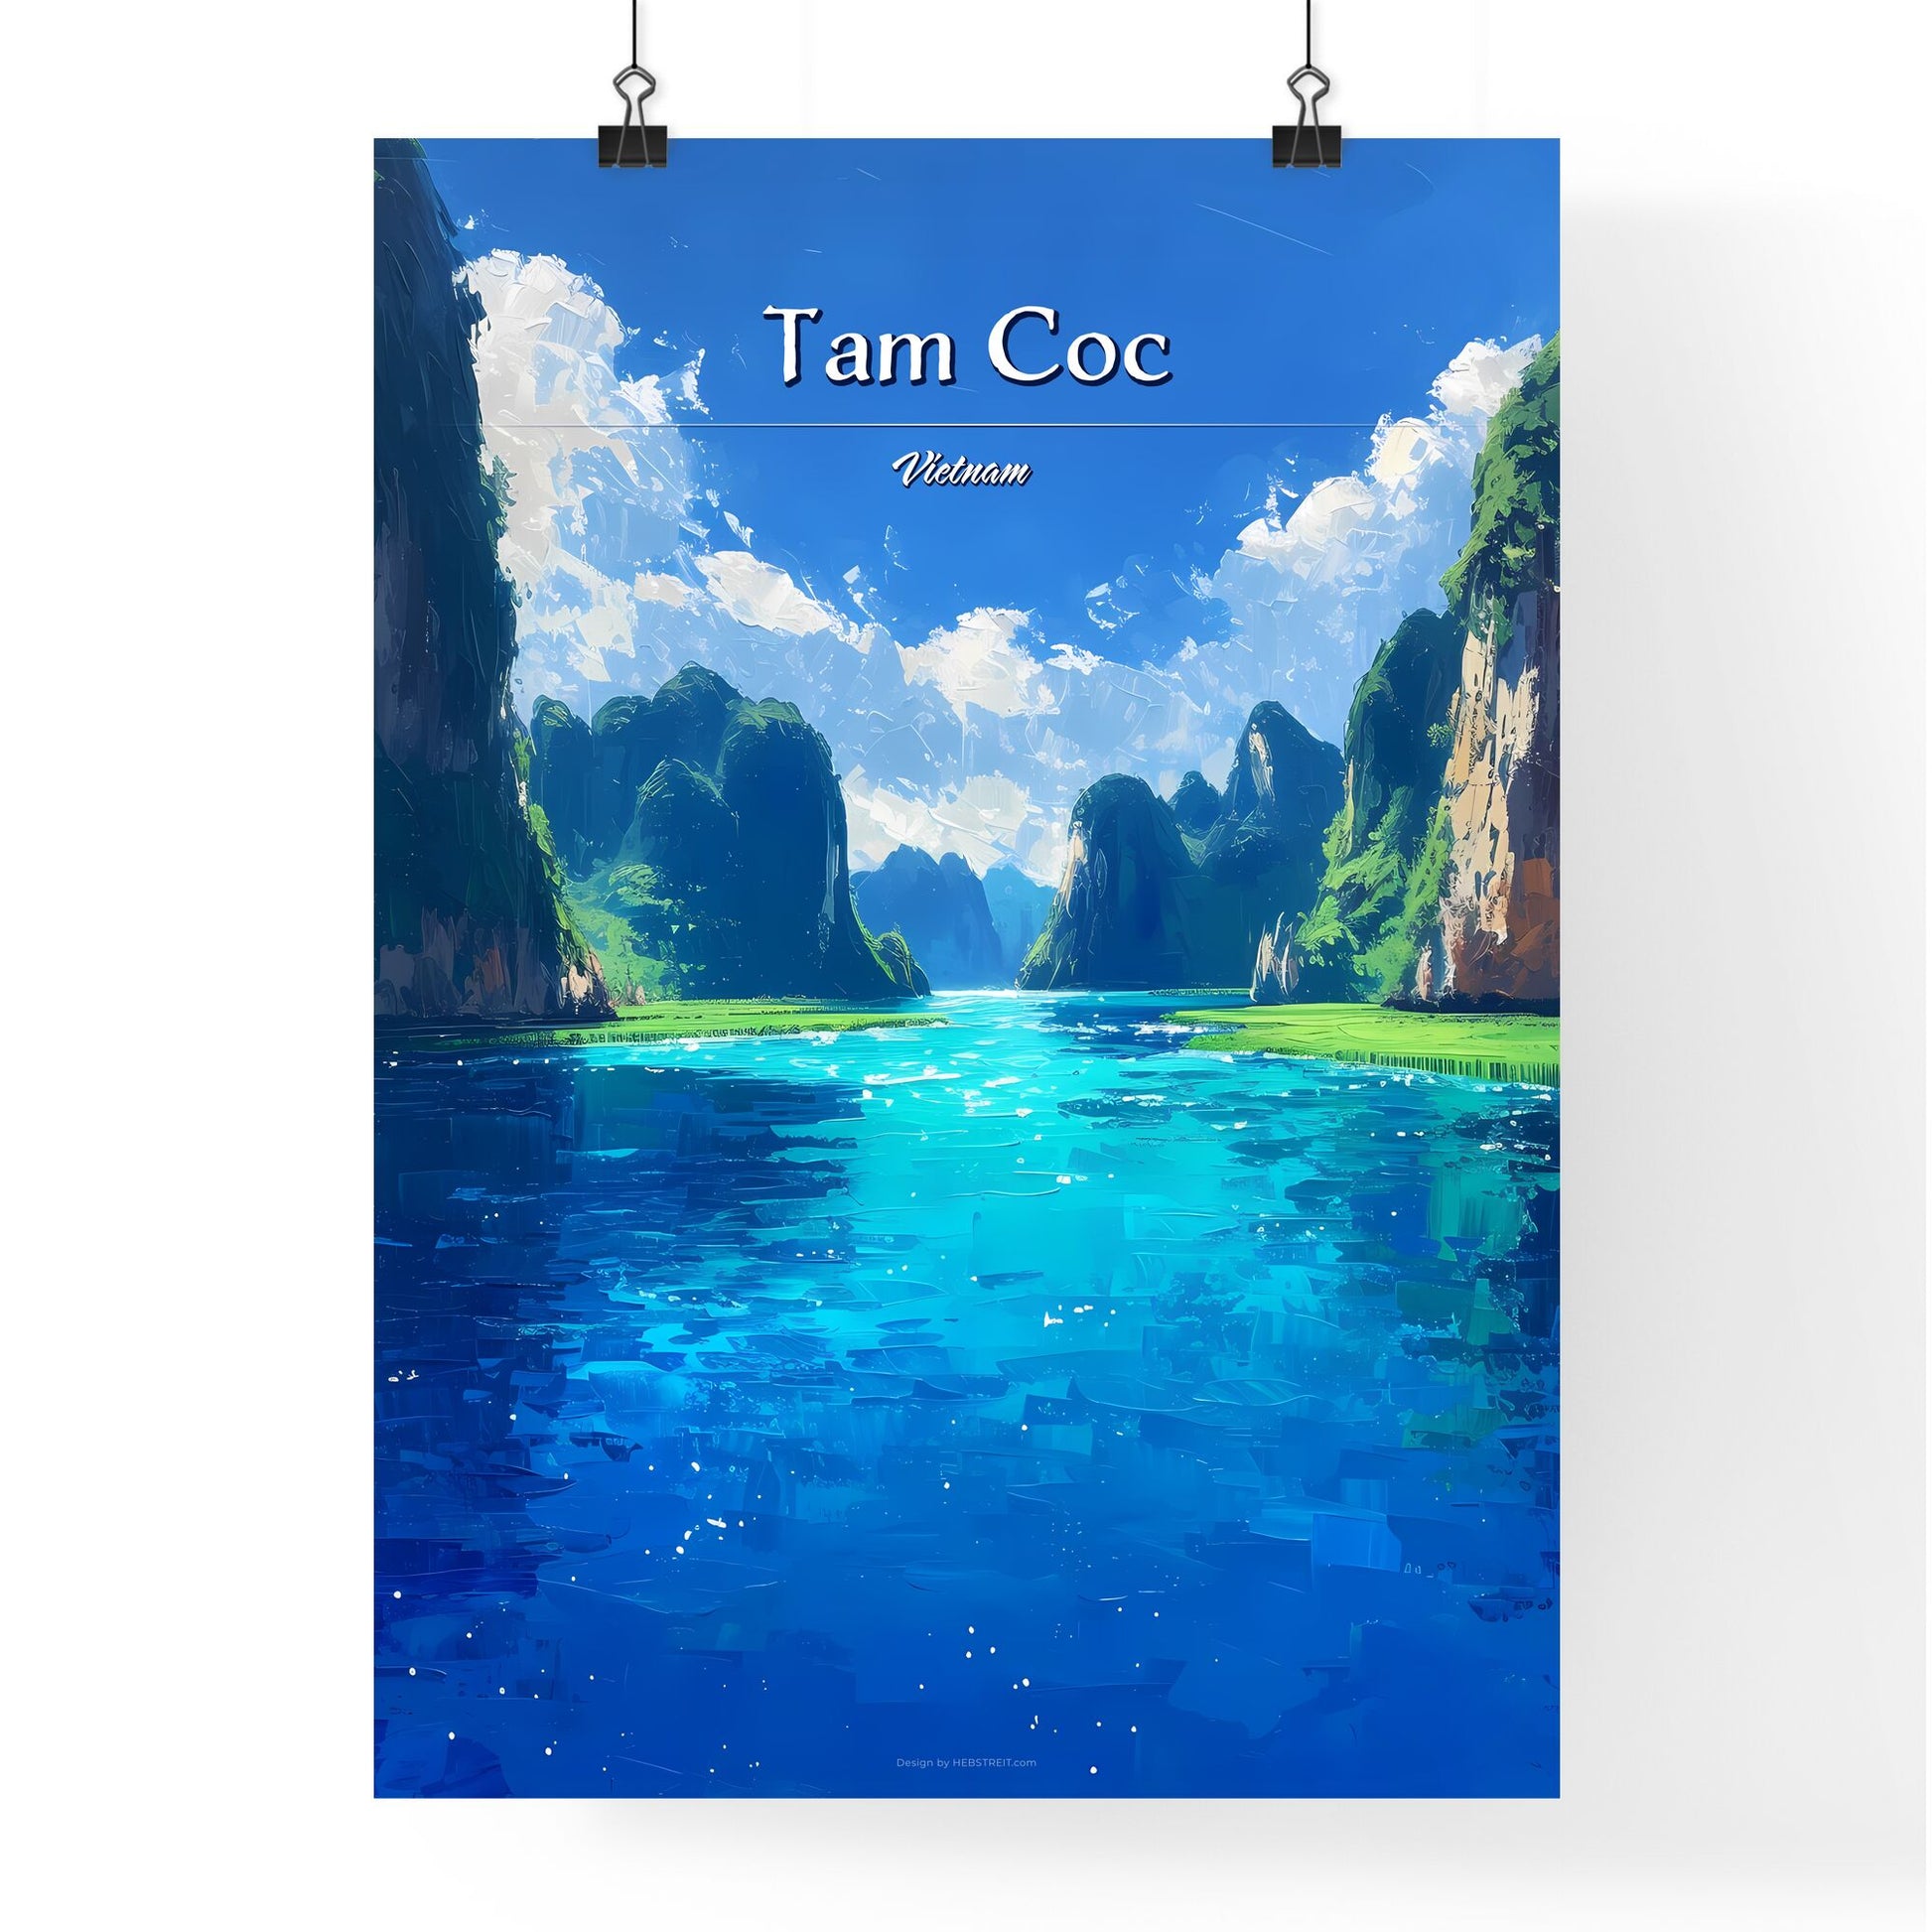 Tam Coc, Vietnam - Art print of a blue water with mountains and grass Default Title